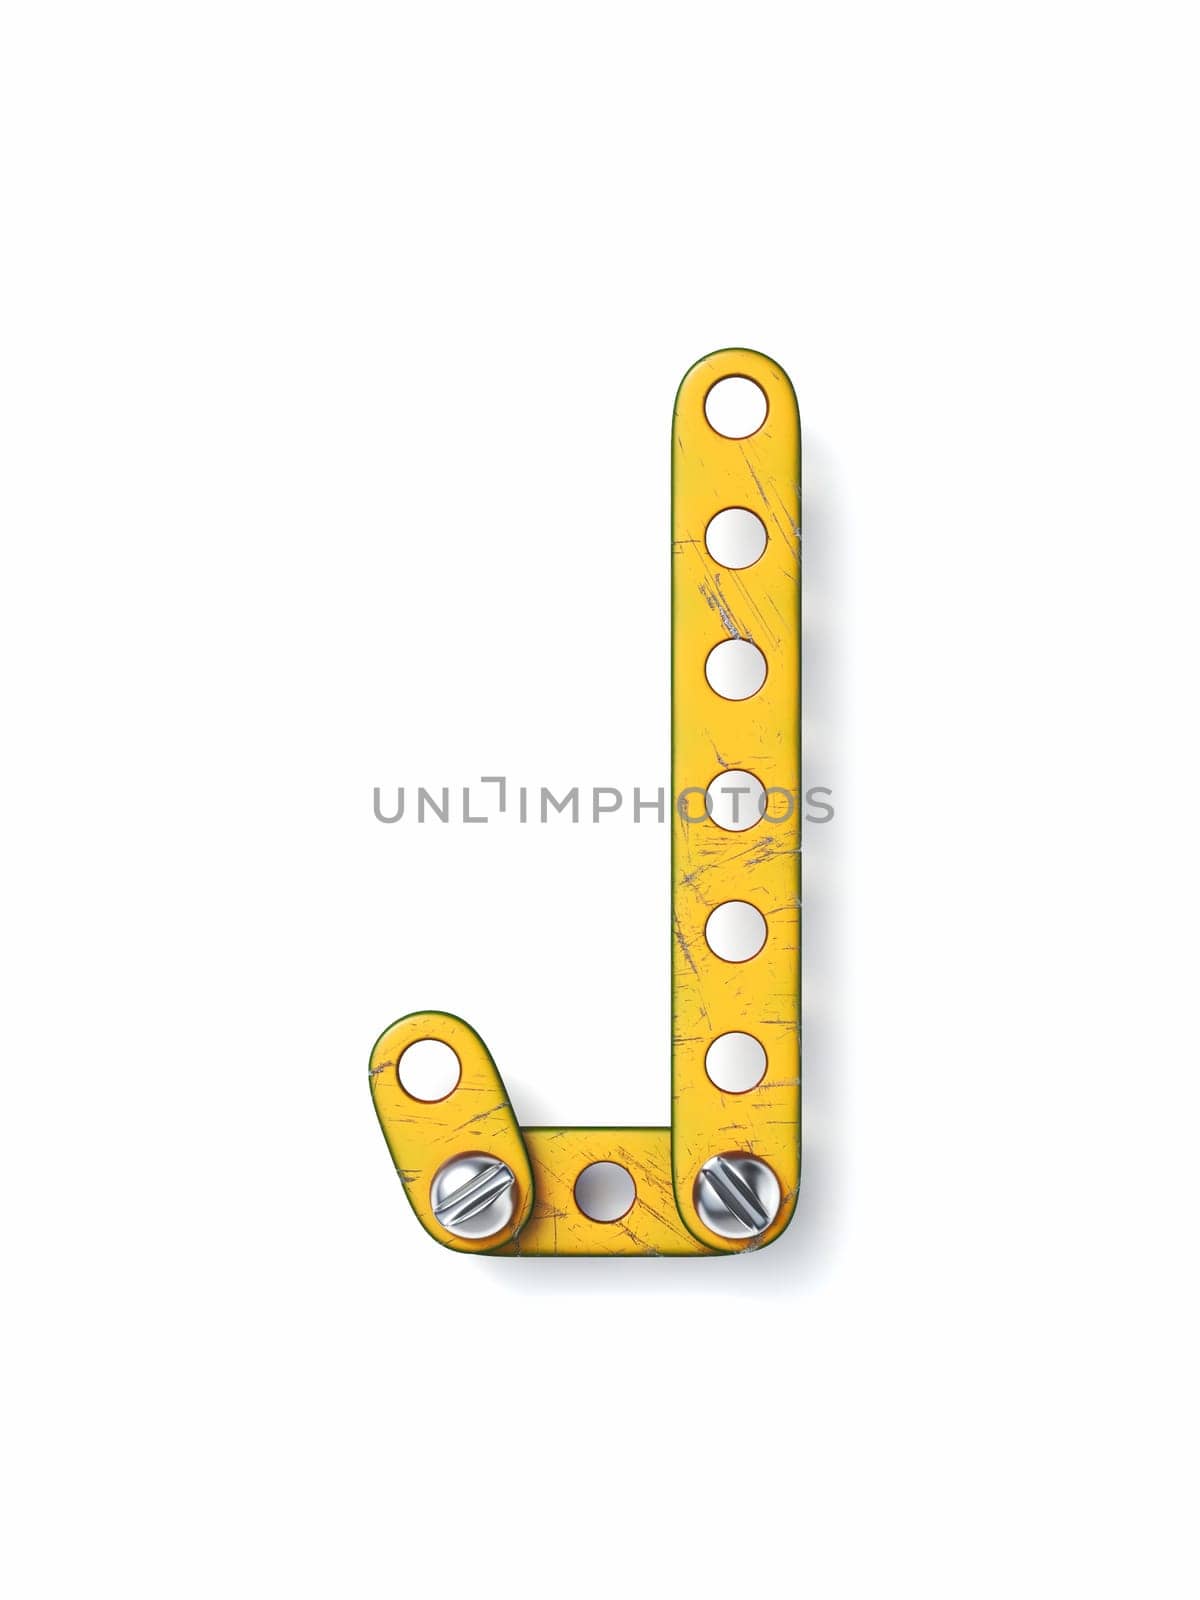 Aged yellow constructor font Letter J 3D rendering illustration isolated on white background